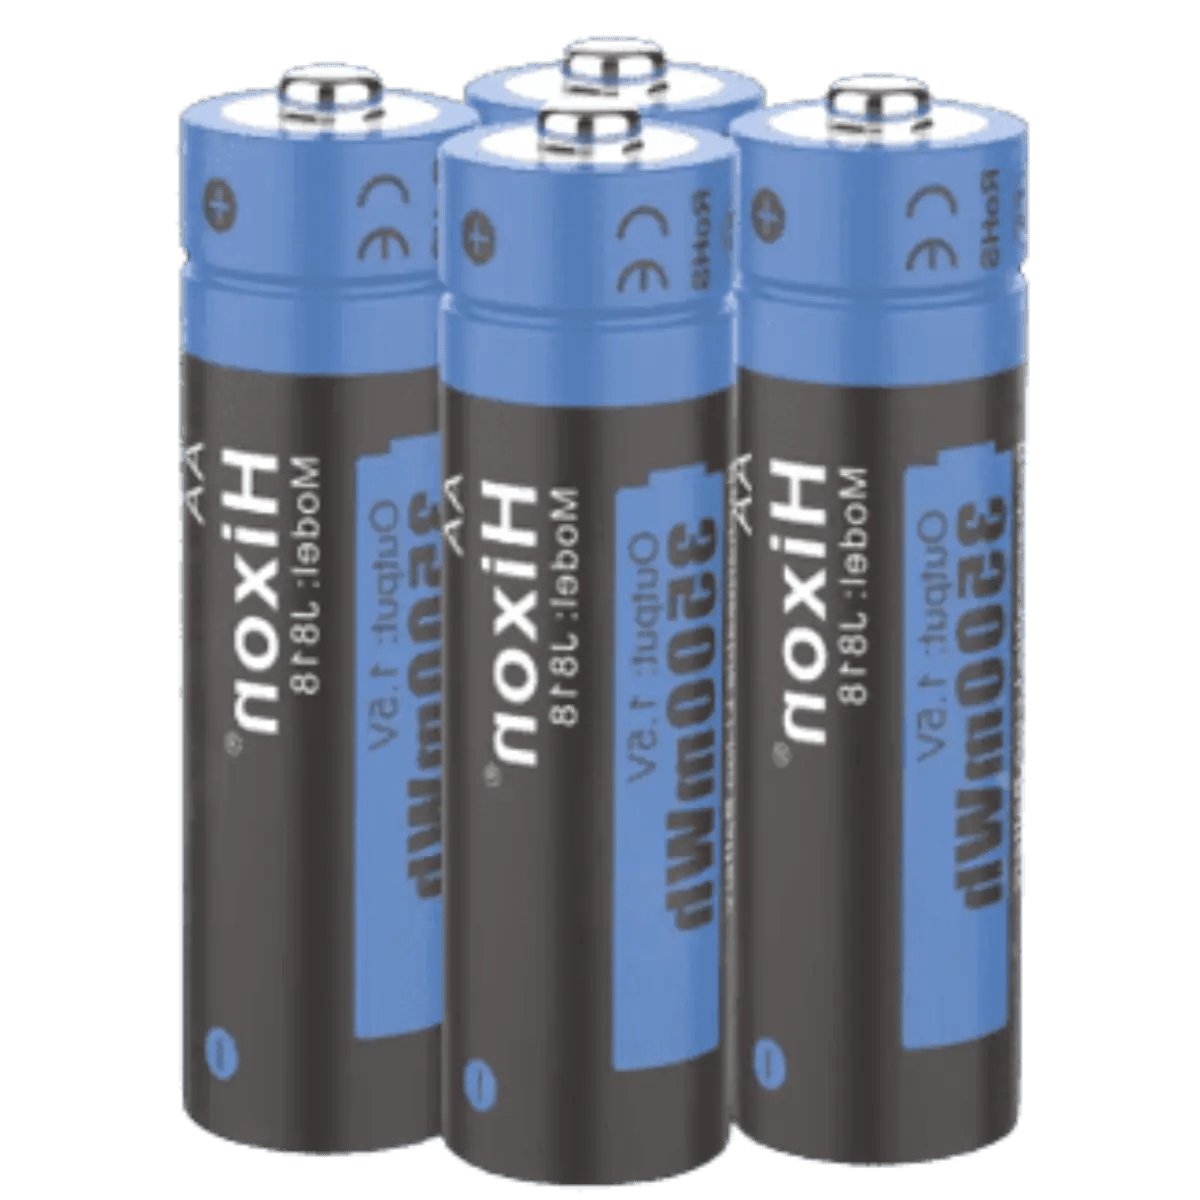 x4 Batteries rechargeables AA  LR6 1.5V + chargeur